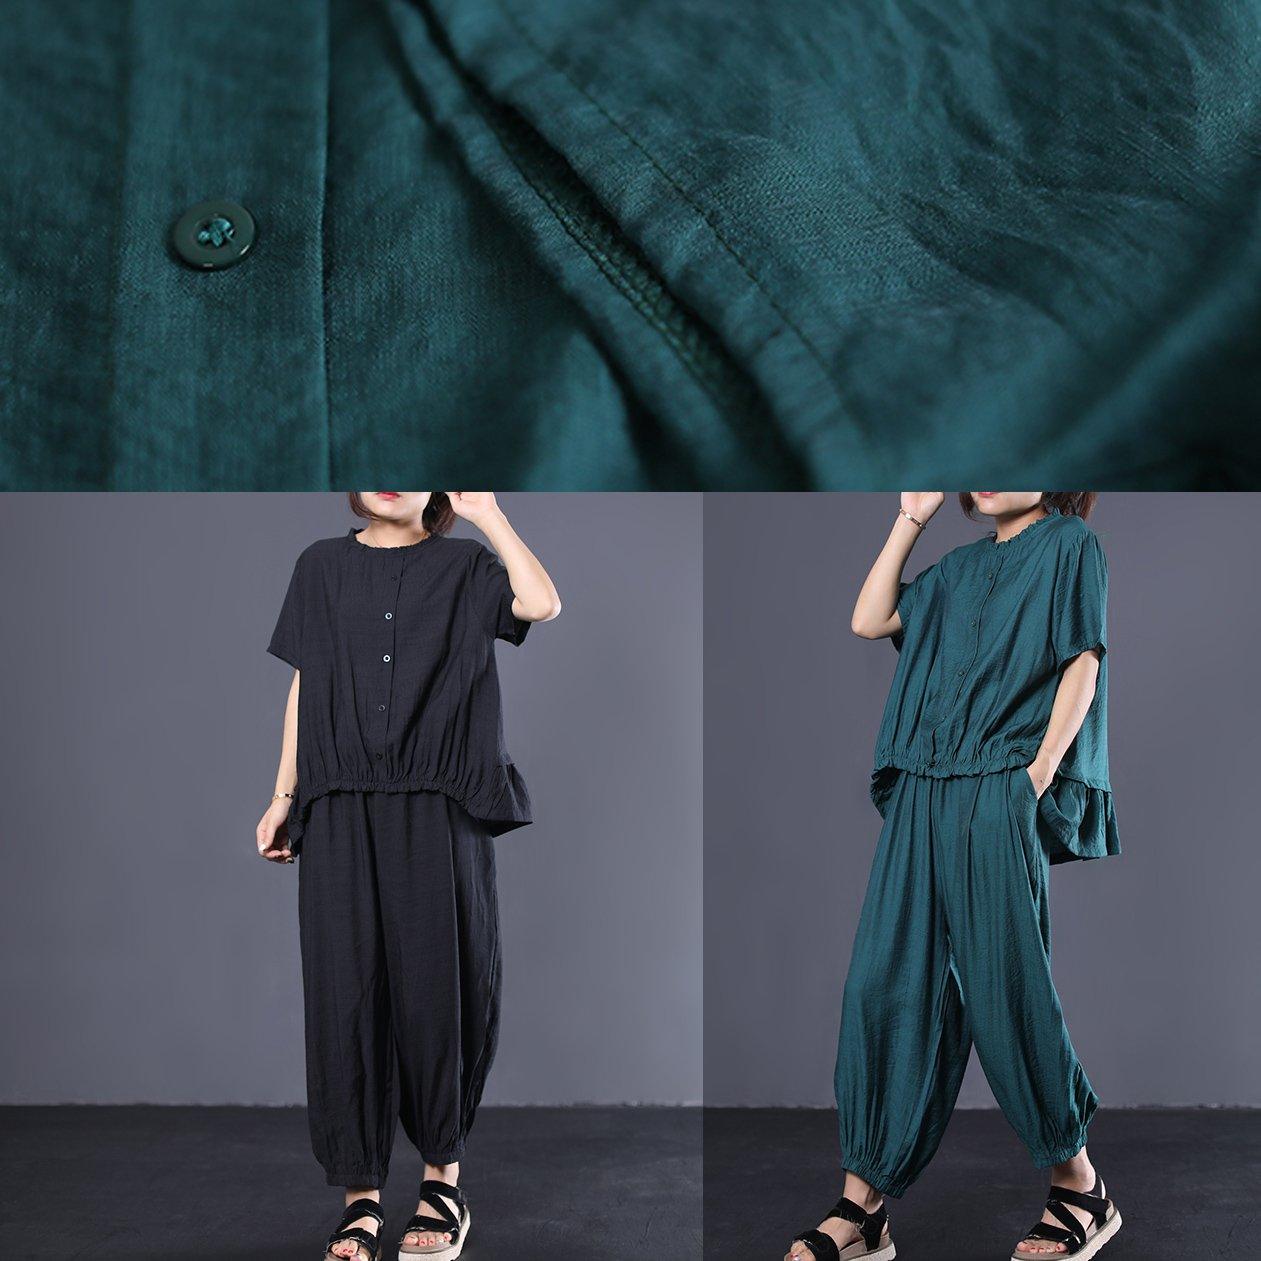 new green blended two pieces loose ruffles tops and fashion casual harem pants - Omychic